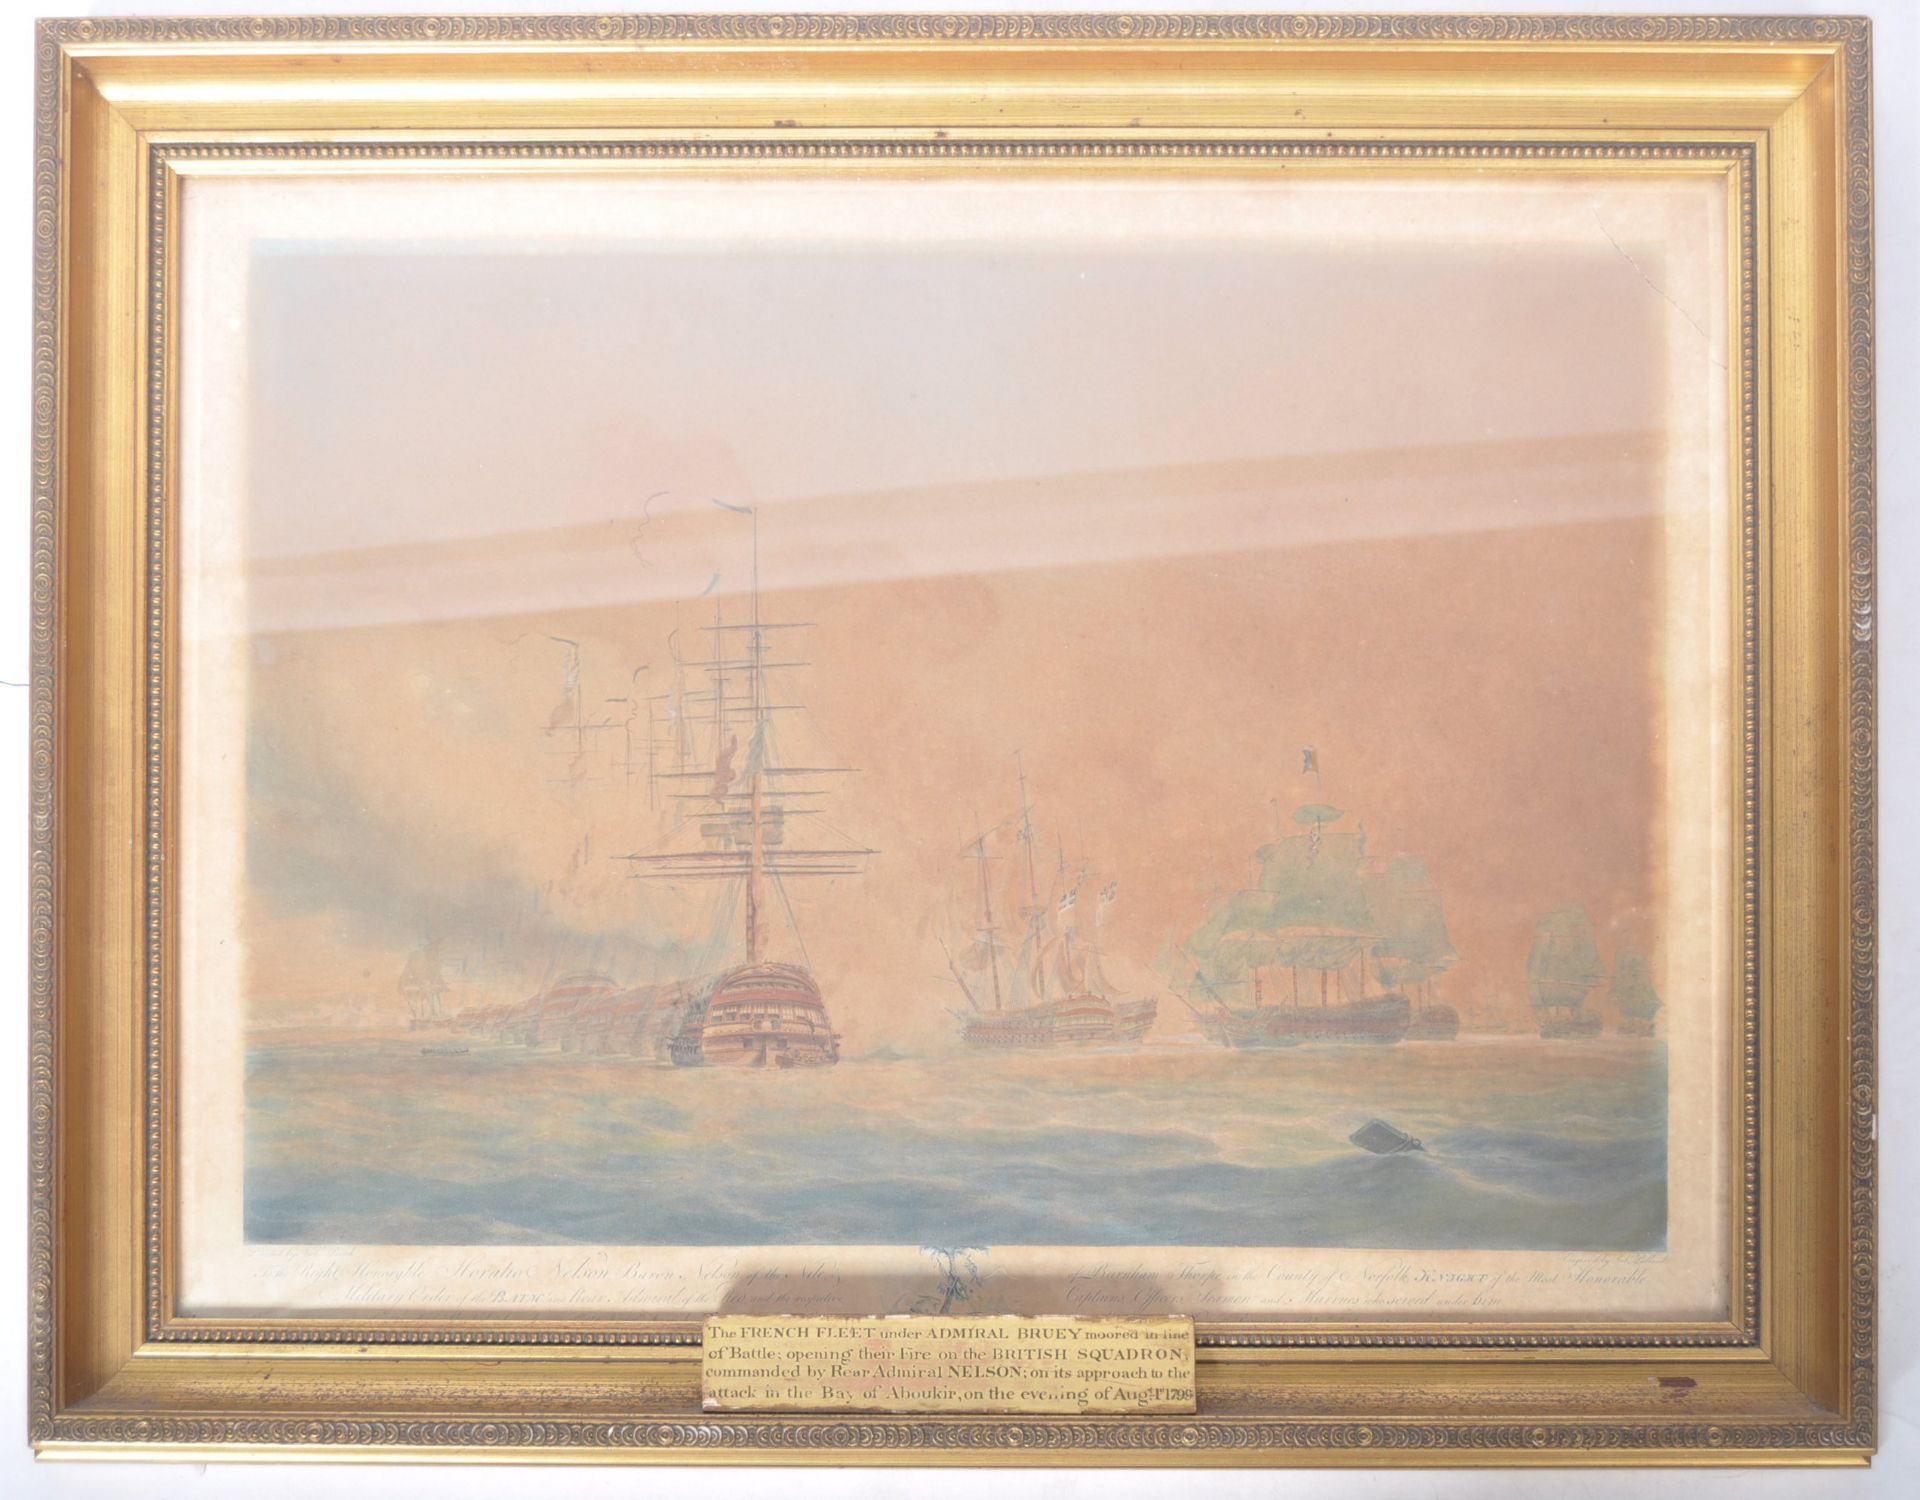 AFTER NICHOLAS POCOCK - FRENCH FLEET - VICTORIAN ENGRAVING